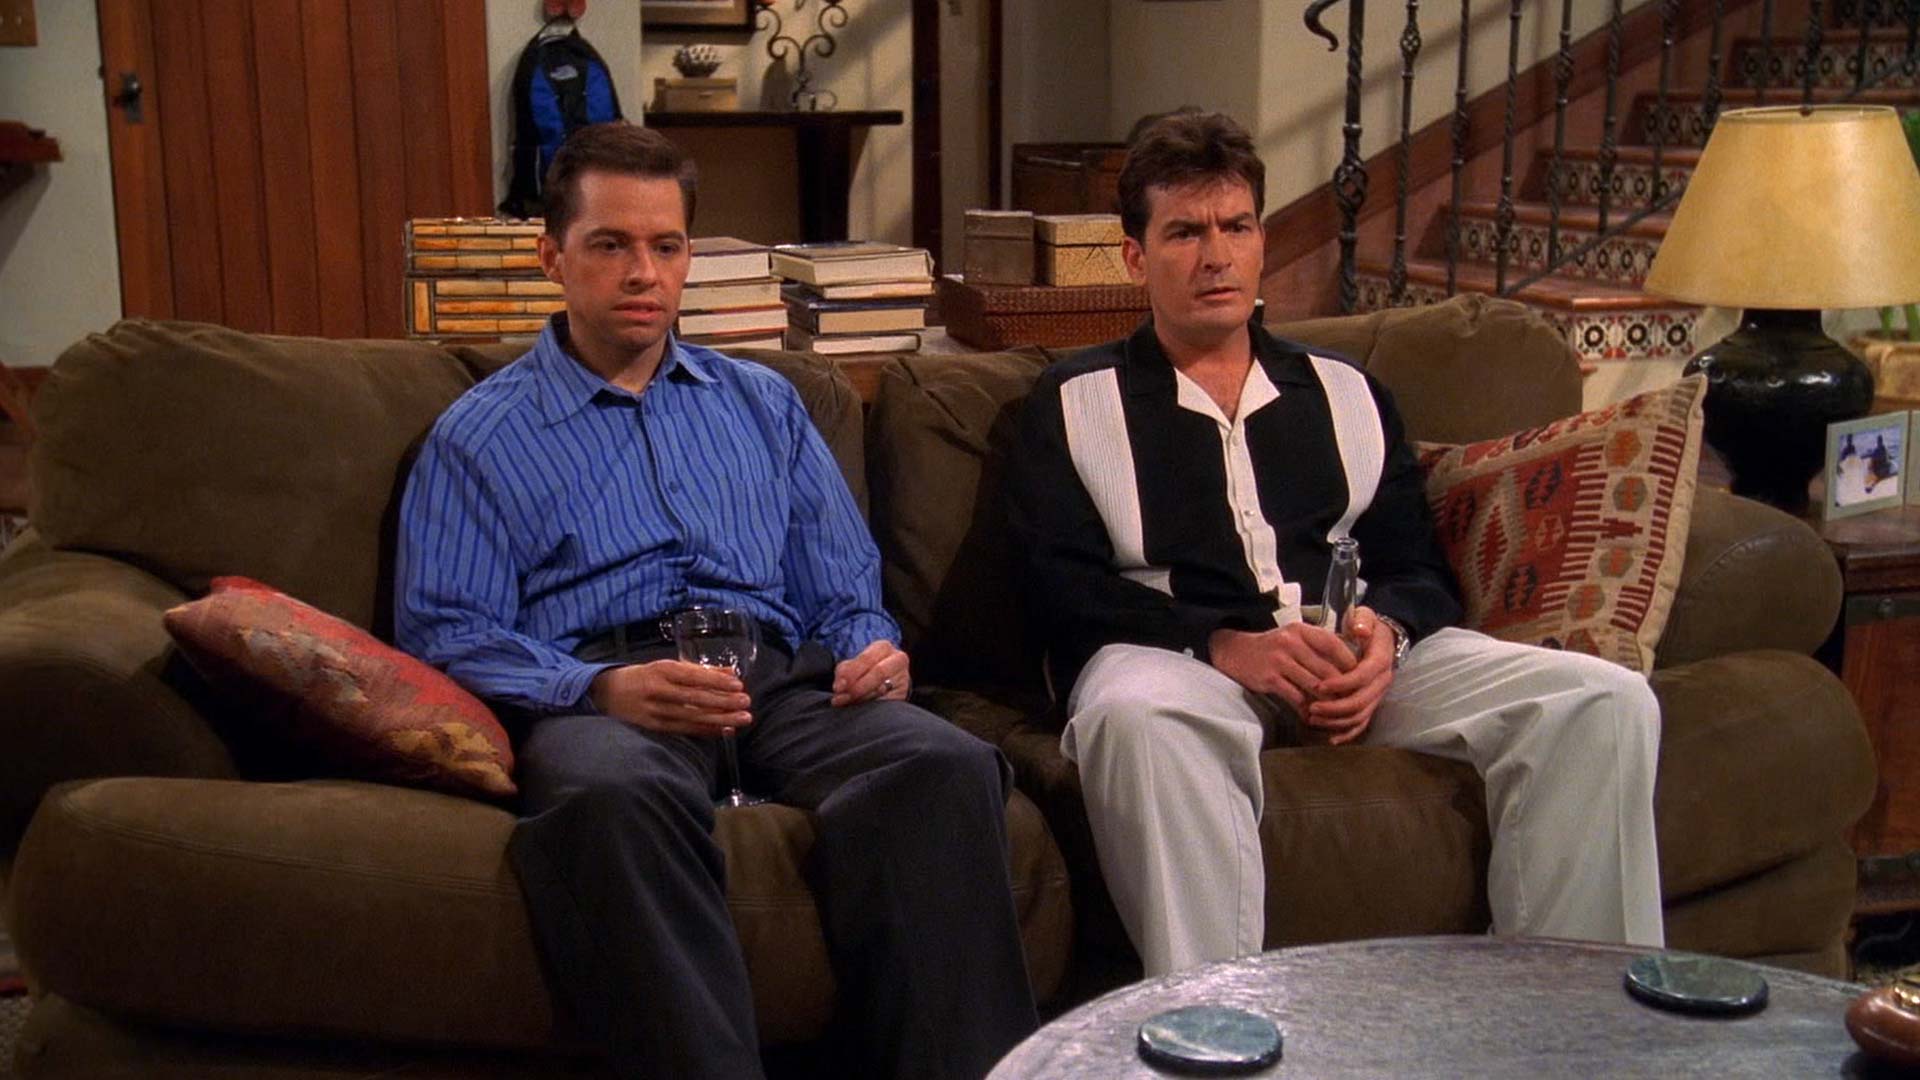 Watch Two and a Half Men Season 1 Episode 19 | Stream Full Episodes